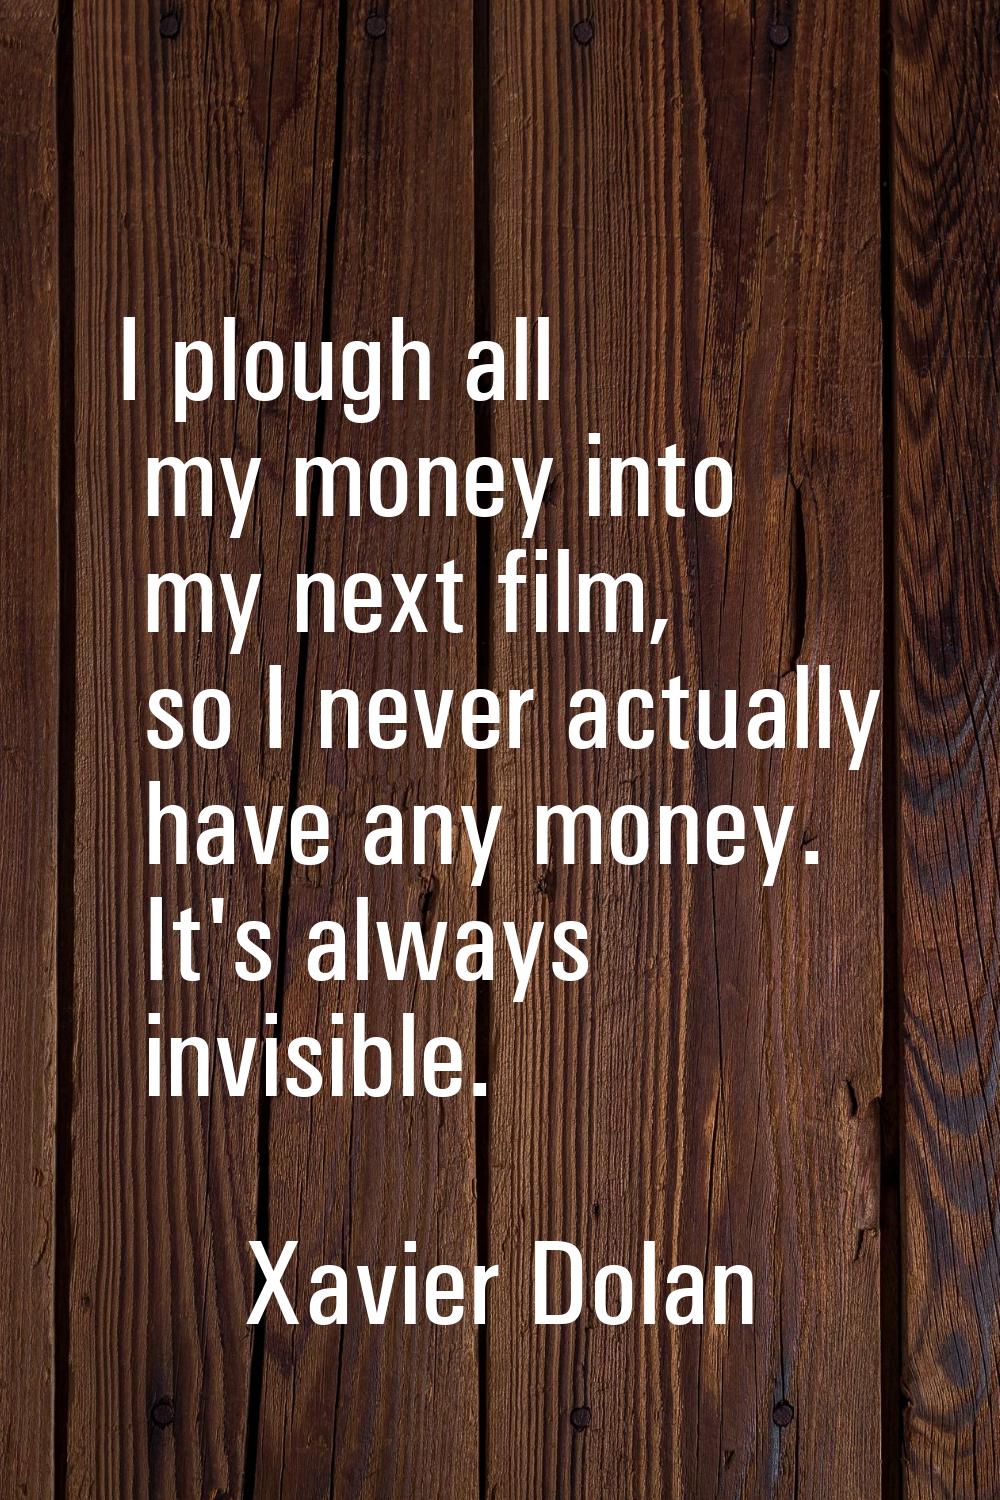 I plough all my money into my next film, so I never actually have any money. It's always invisible.